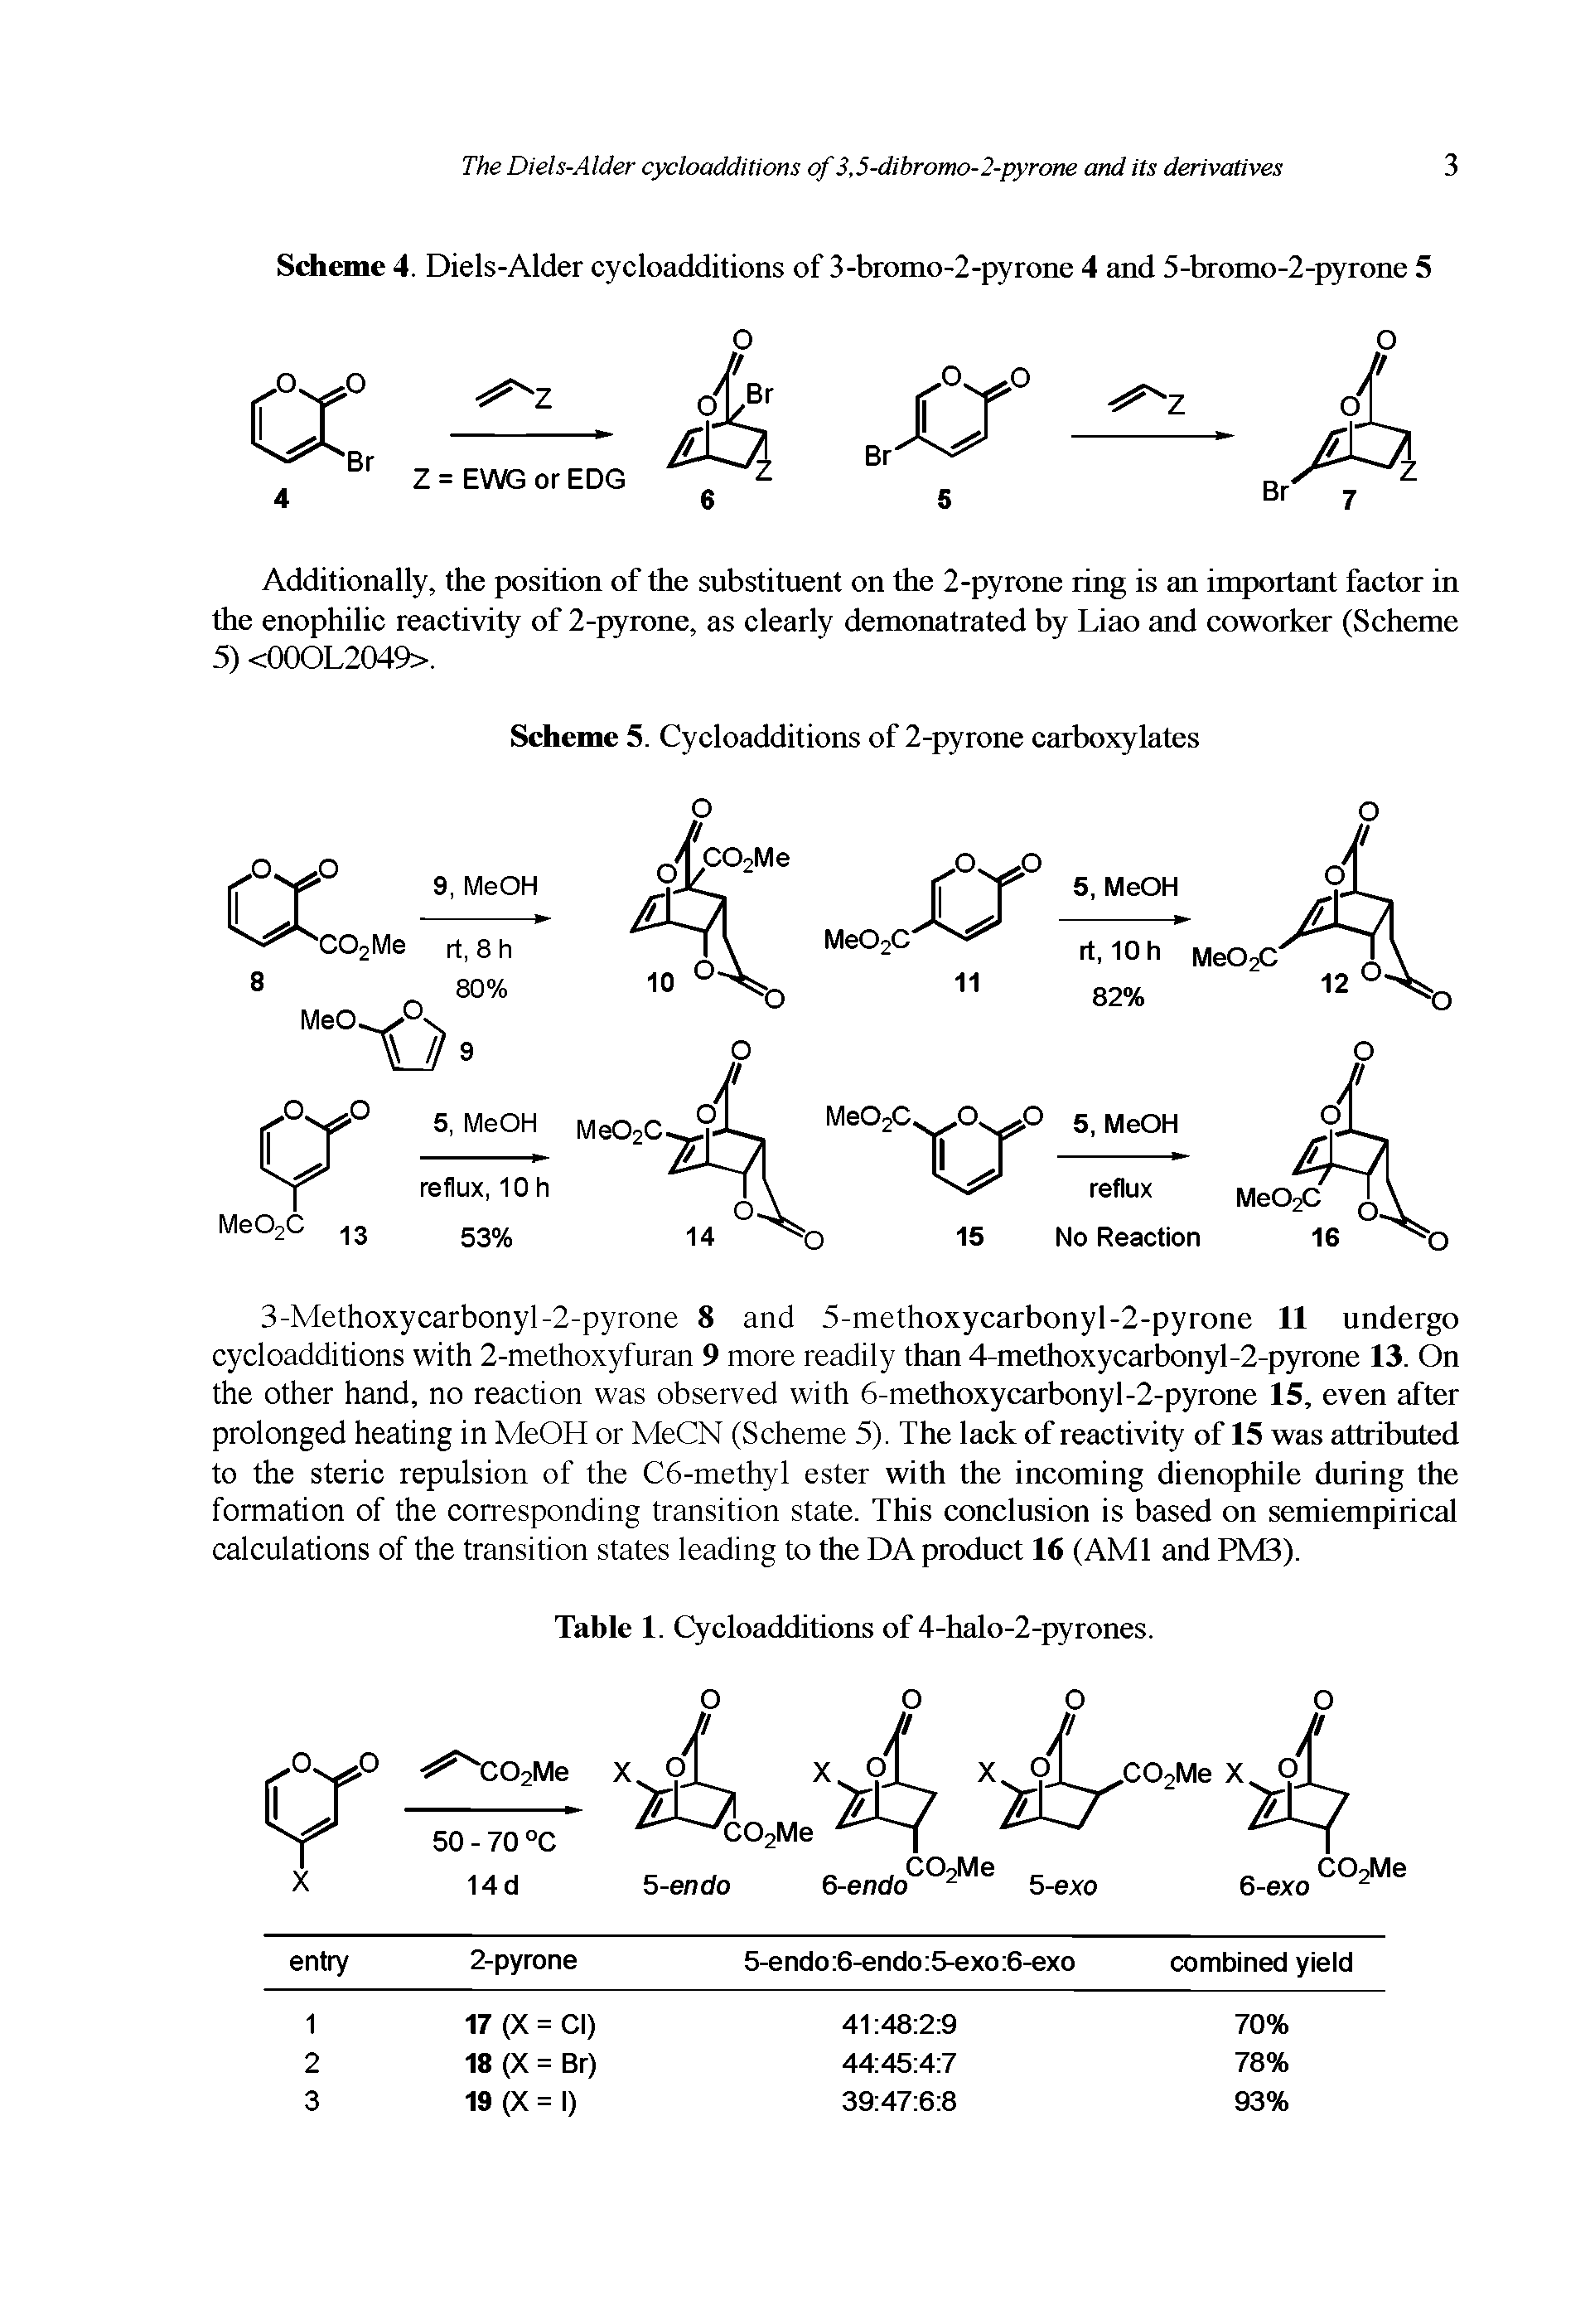 Scheme 4. Diels-Alder cycloadditions of 3-bromo-2-pyrone 4 and 5-bromo-2-pyrone 5...